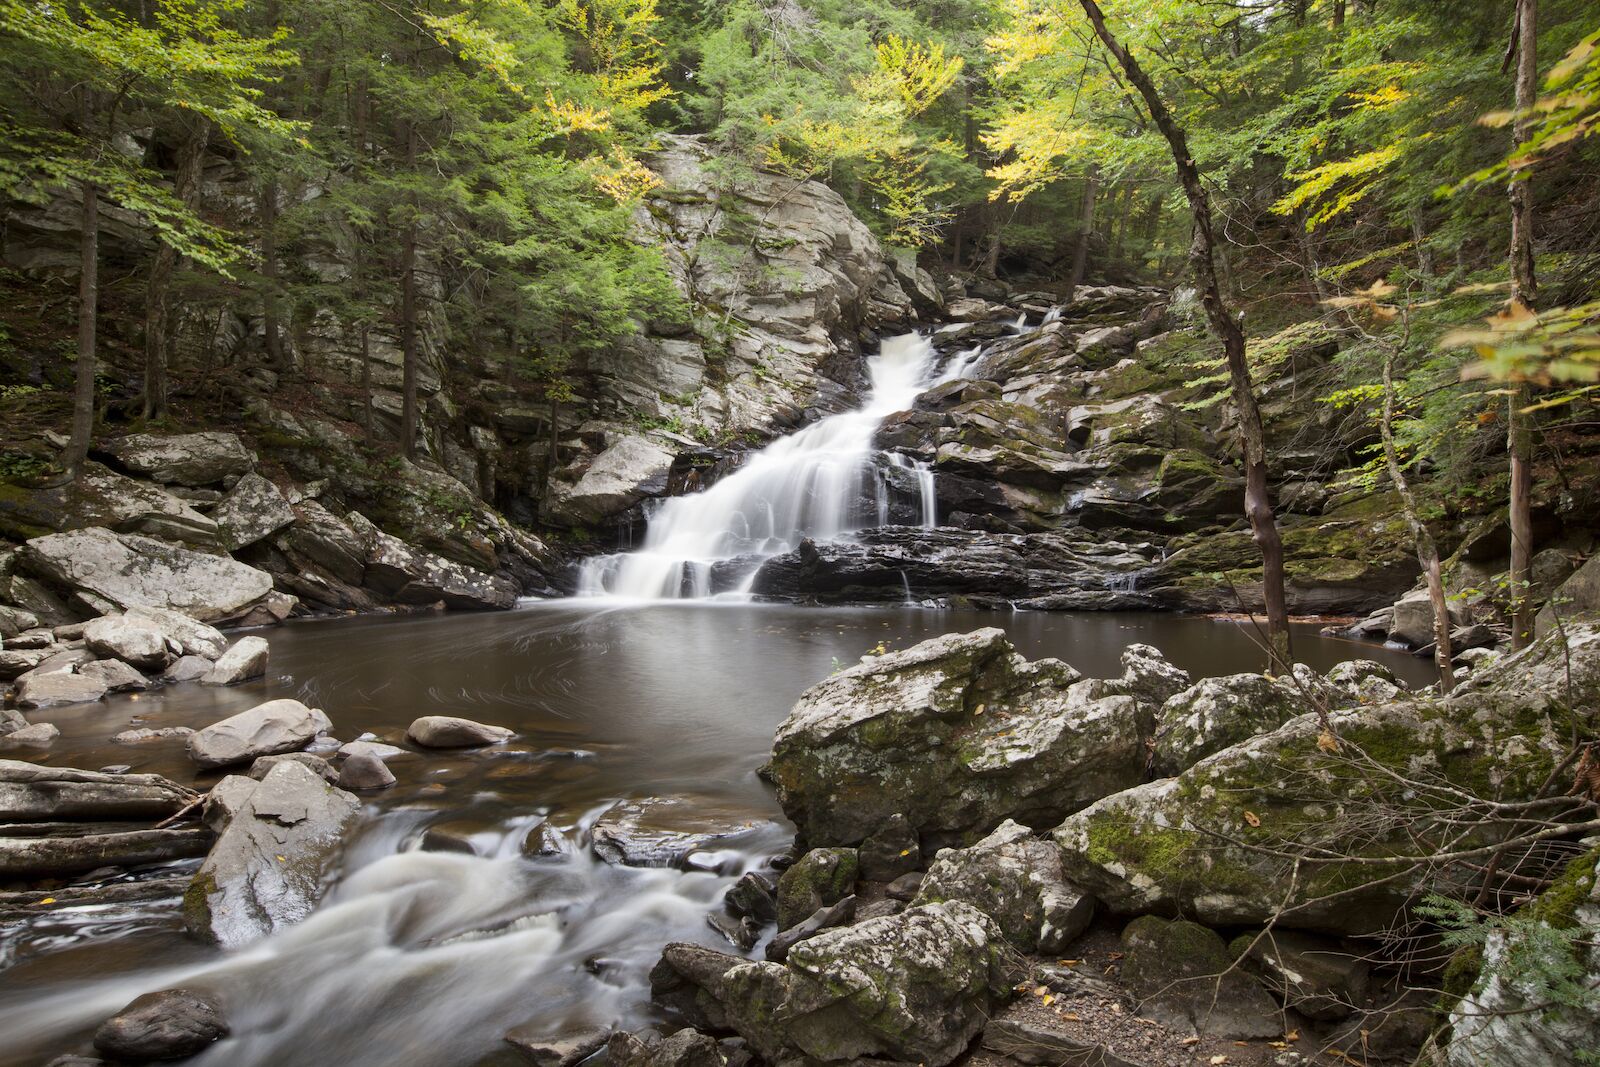 A view of Wahconah Falls in the Berkshire Mountains of western Massachusetts.